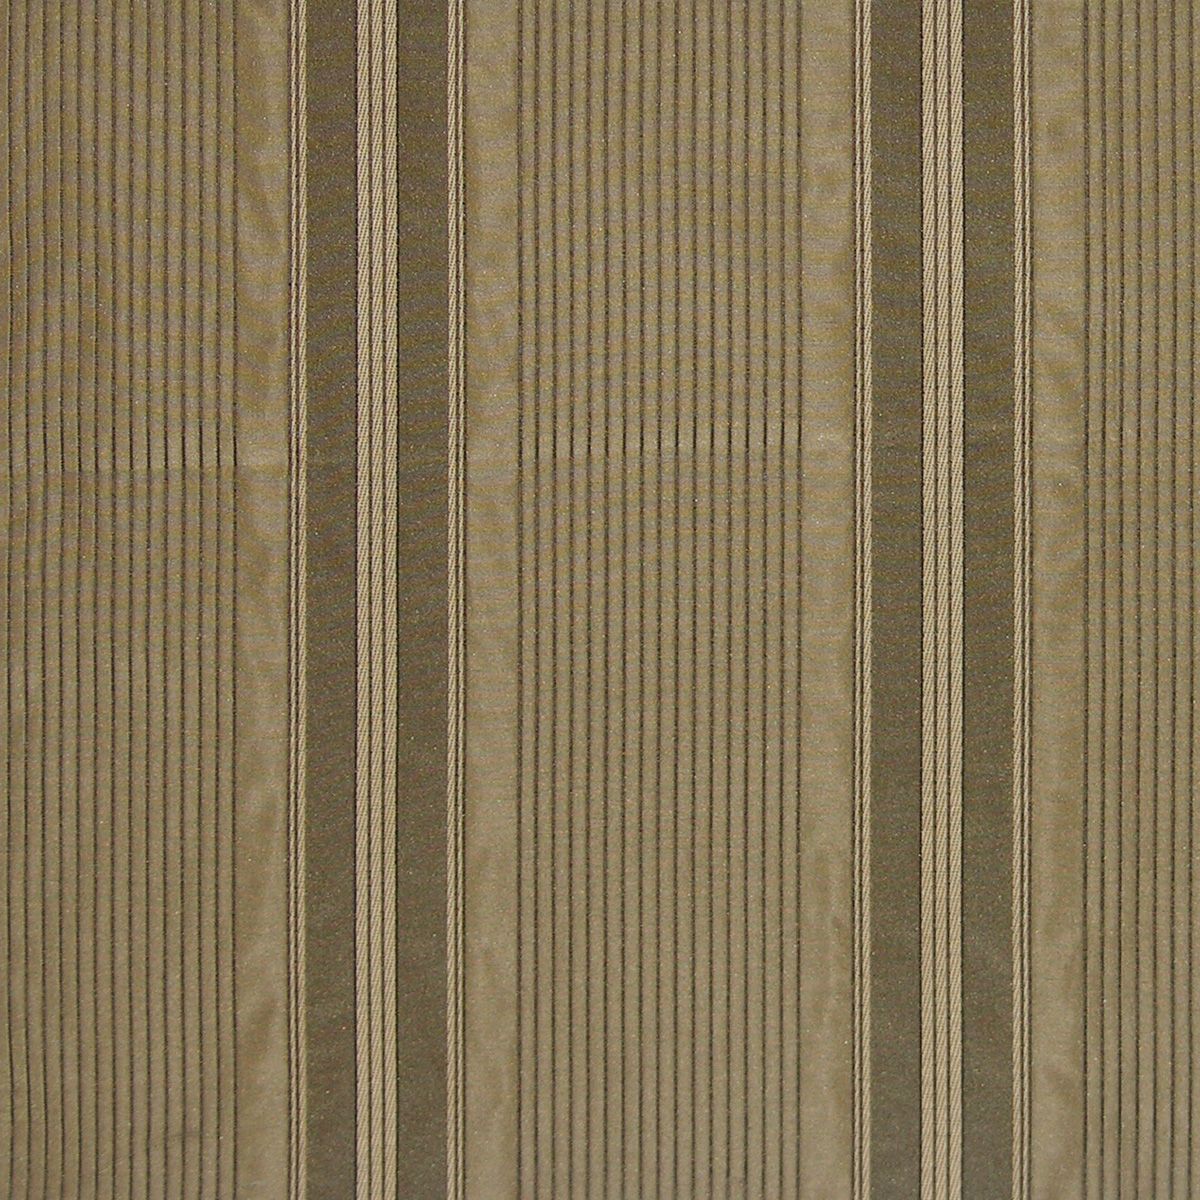 Malabar Stripe fabric in olive color - pattern number HB 00101440 - by Scalamandre in the Old World Weavers collection